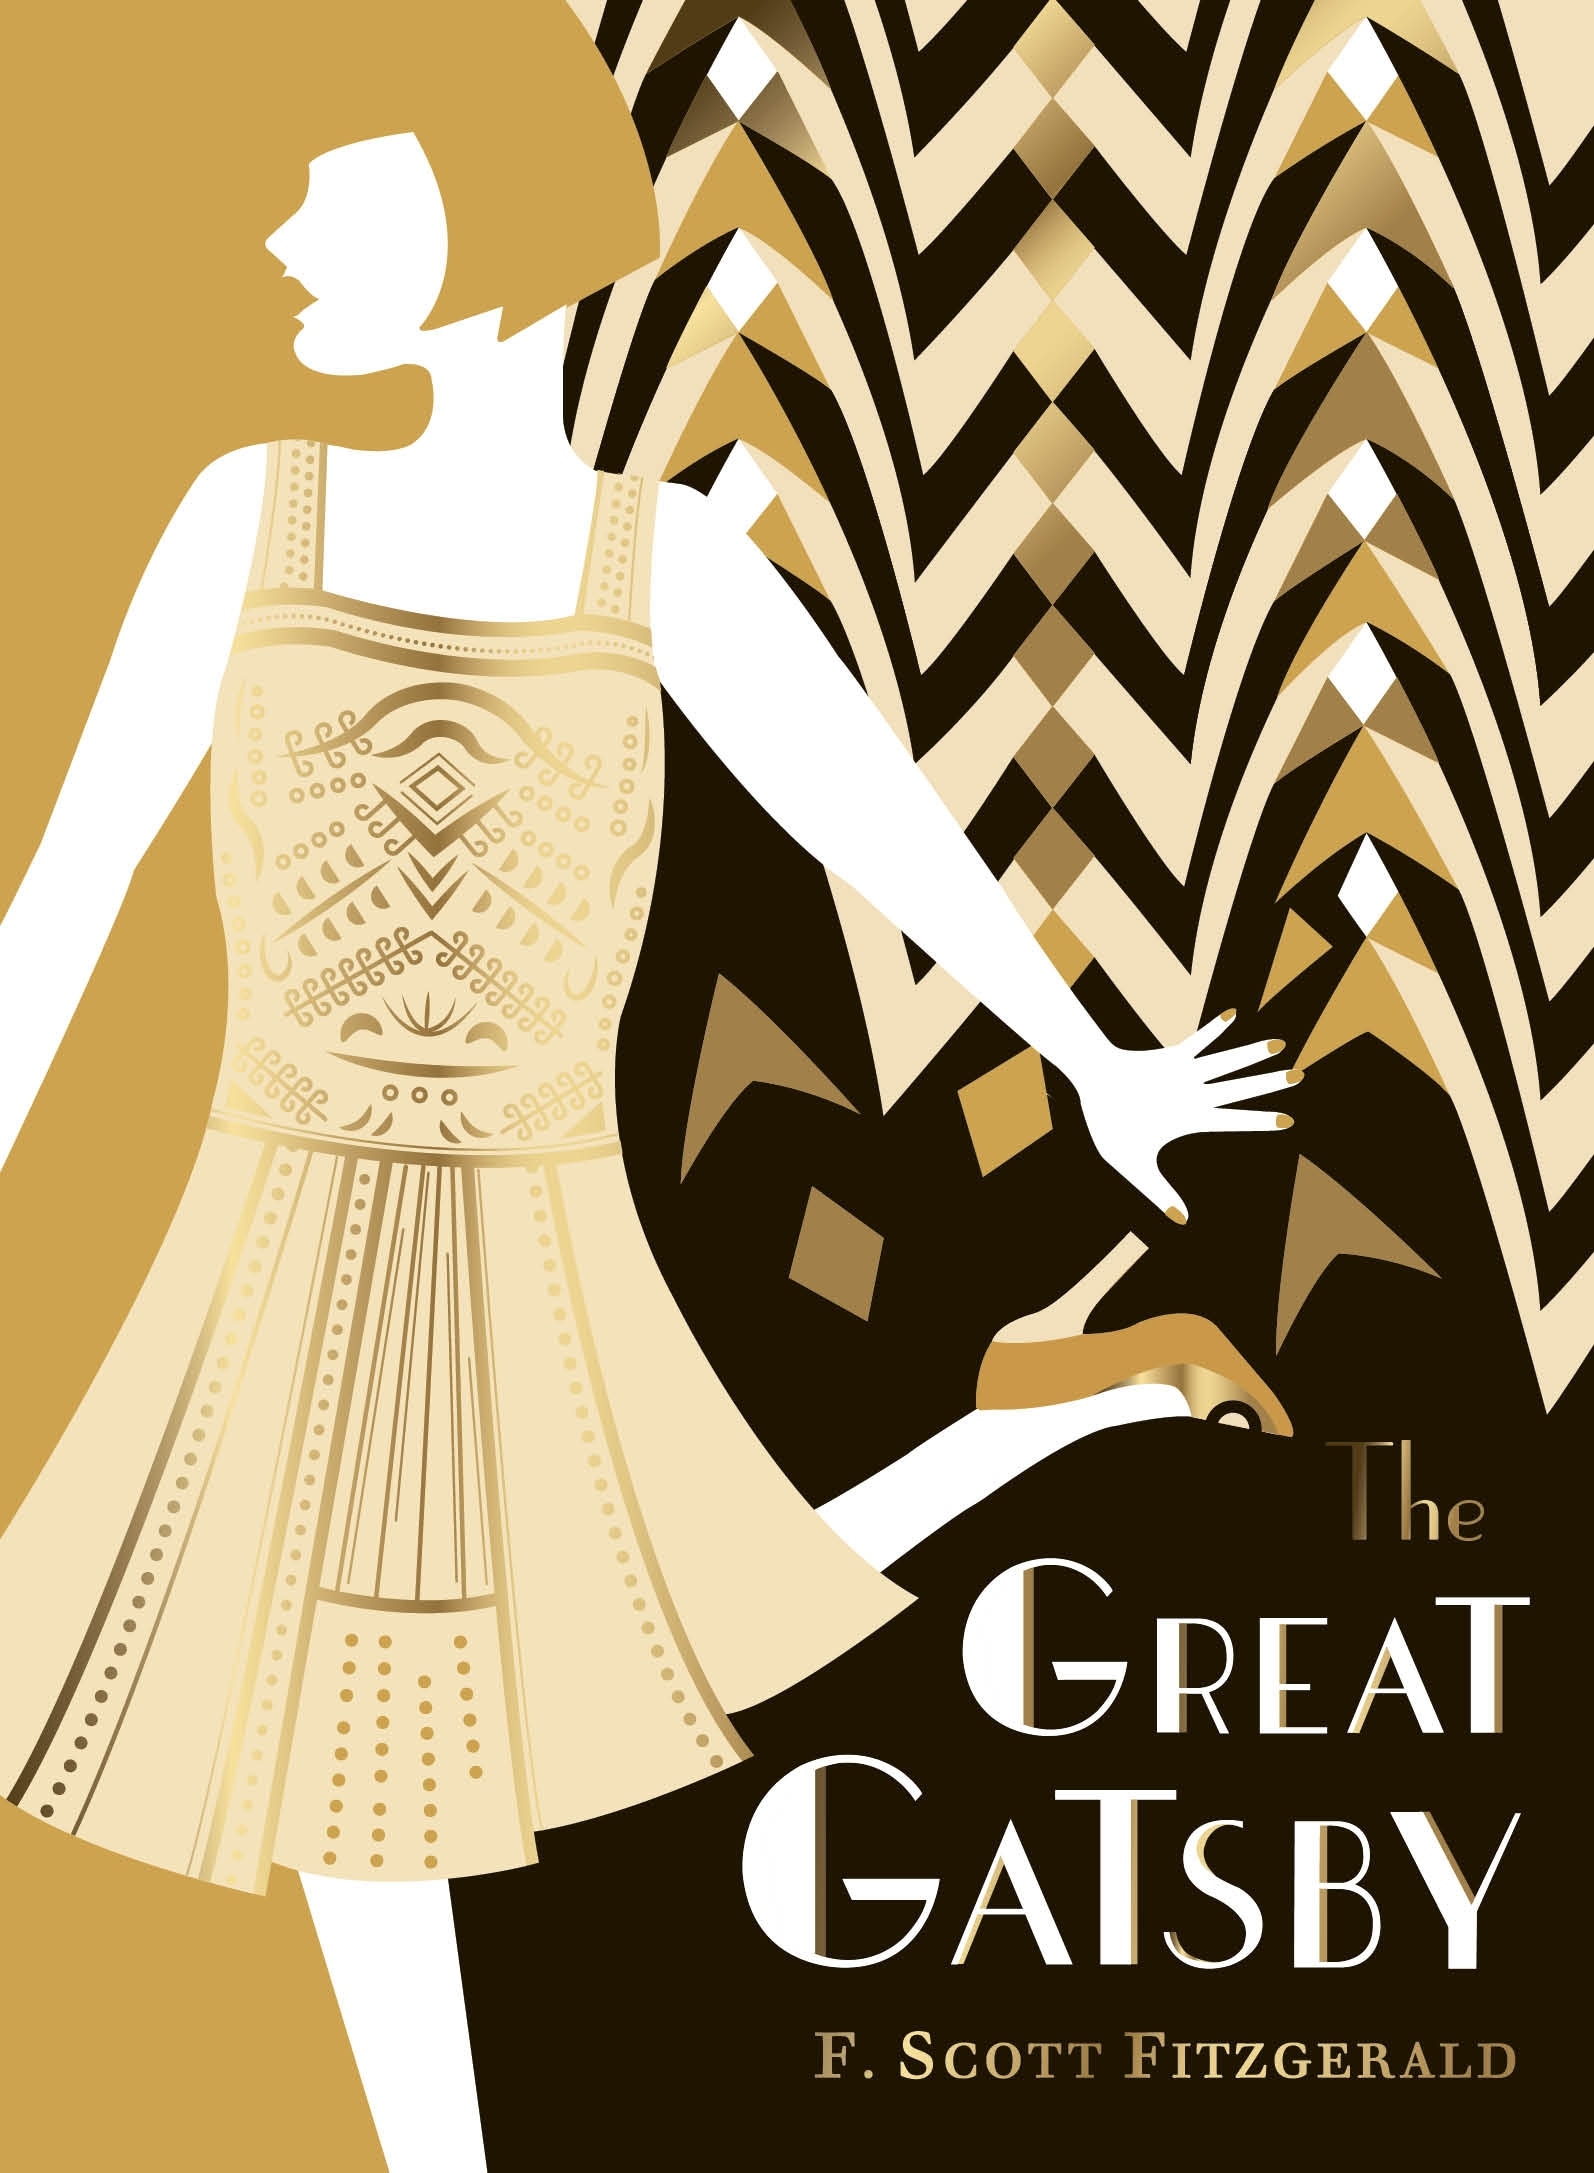 Book “The Great Gatsby: V&A Collector's Edition” by F. Scott Fitzgerald — February 25, 2021